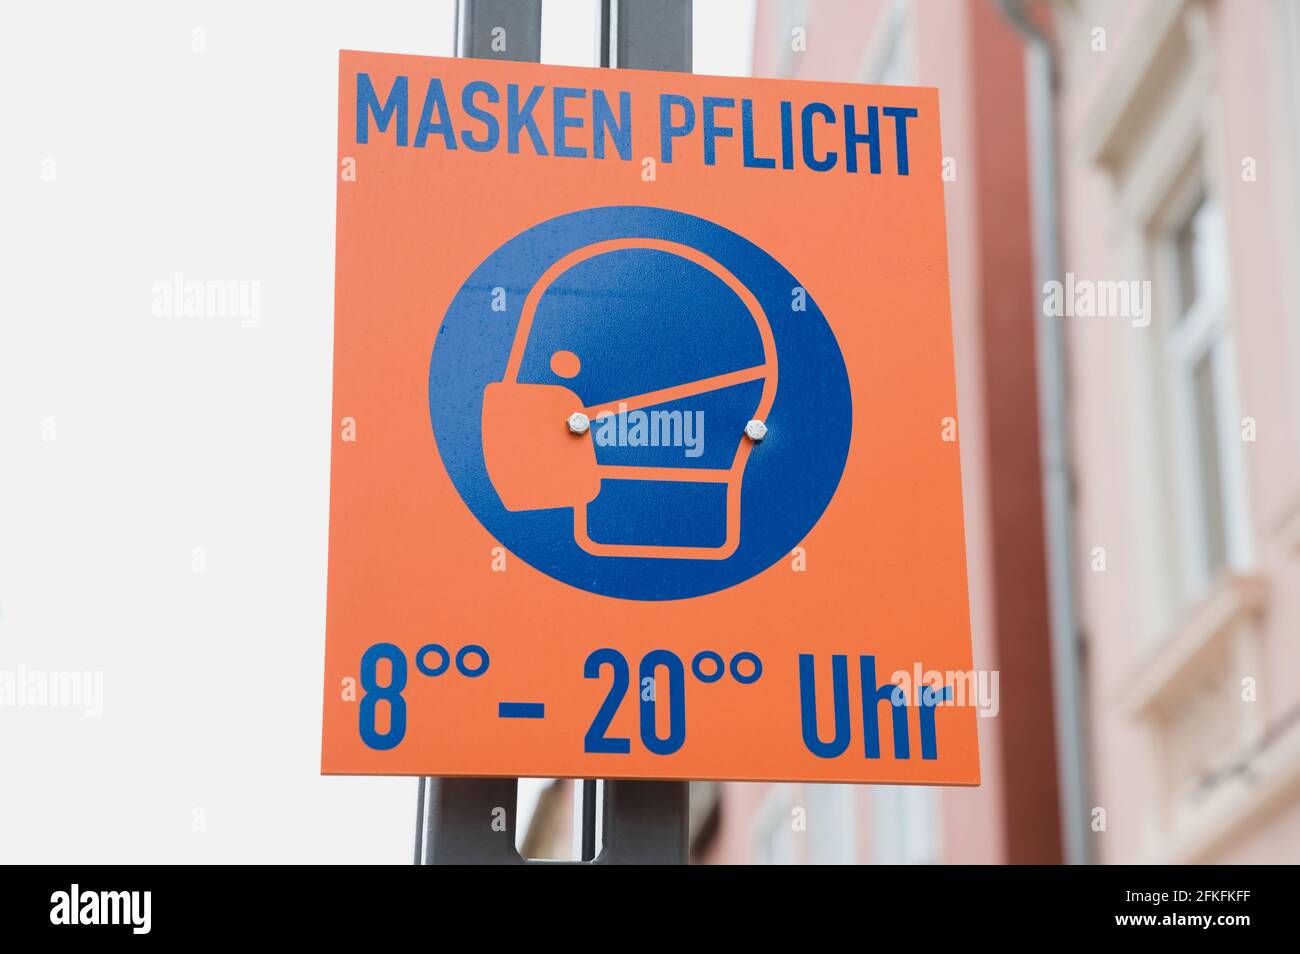 Speyer, Germany - May 01, 2021: German sign with the word 'Maskenpflicht' which means mask obligation from eight o'clock am to eight o'clock pm Stock Photo